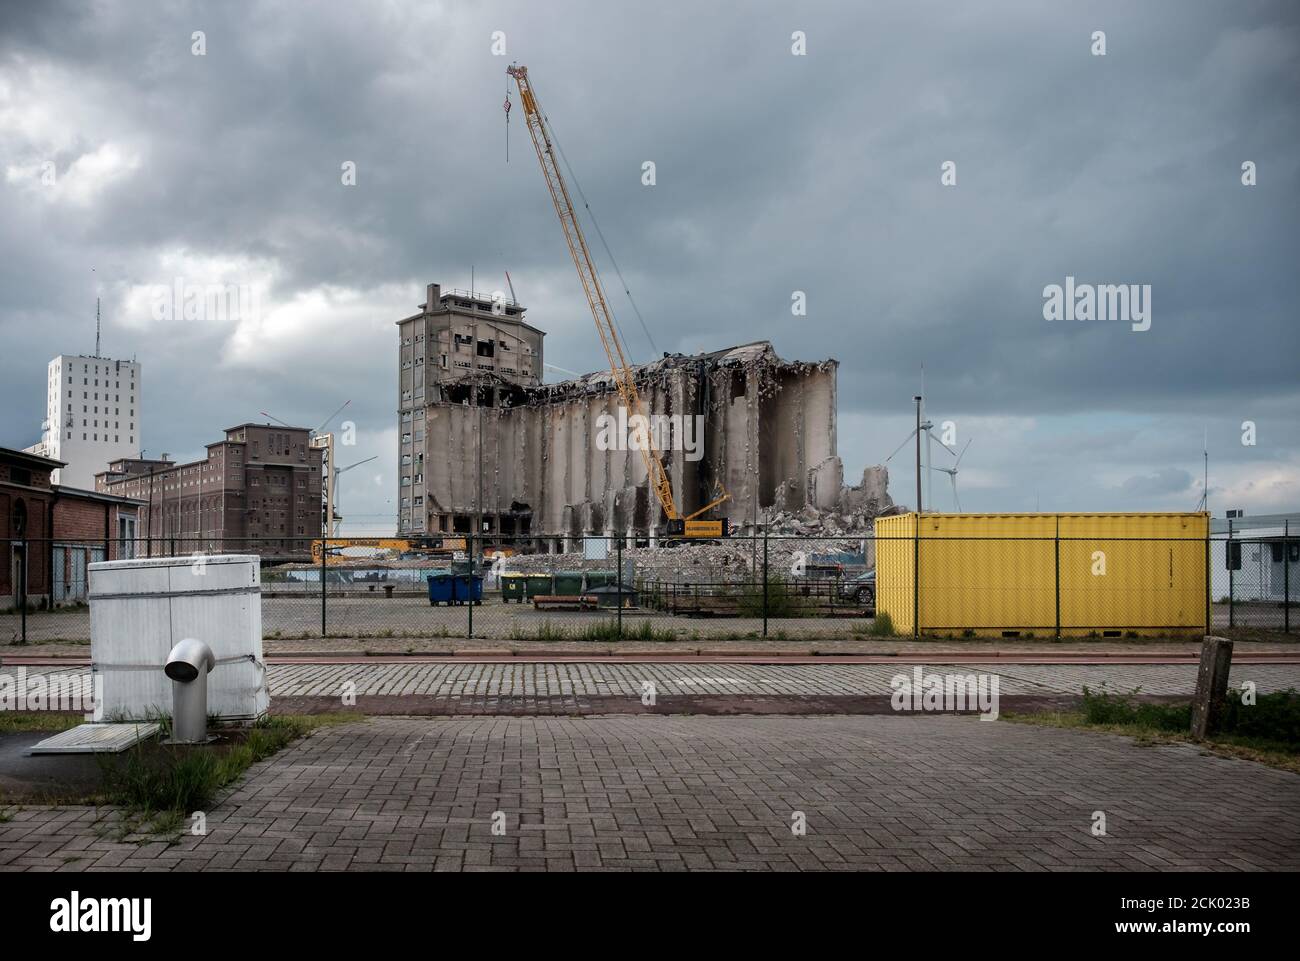 Old grain warehouse SAGMA being demolished to make way for an extension of the Antwerp ringway. Stock Photo